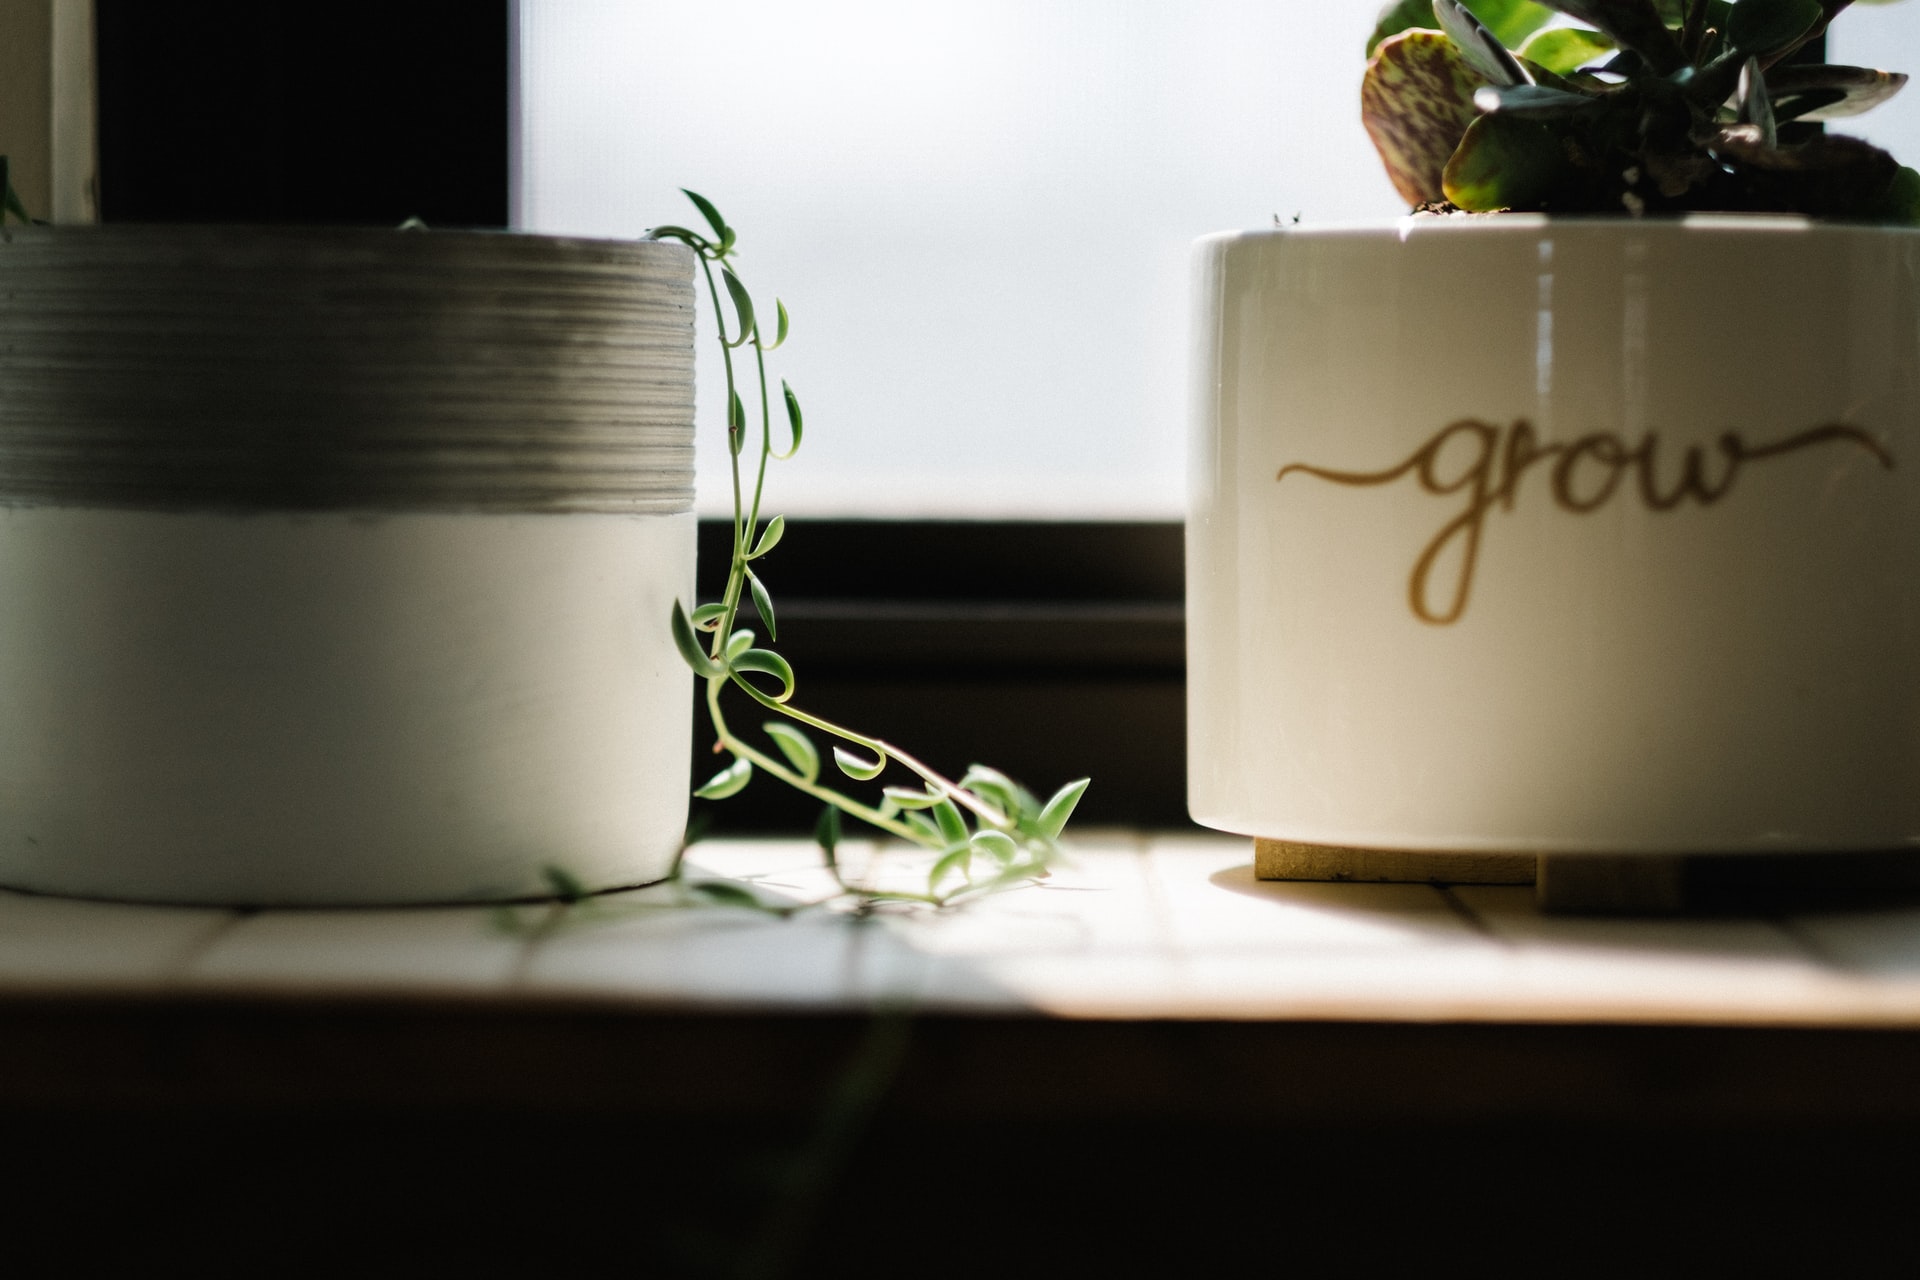 A potted plant with the word "grow" on the ceramic pot